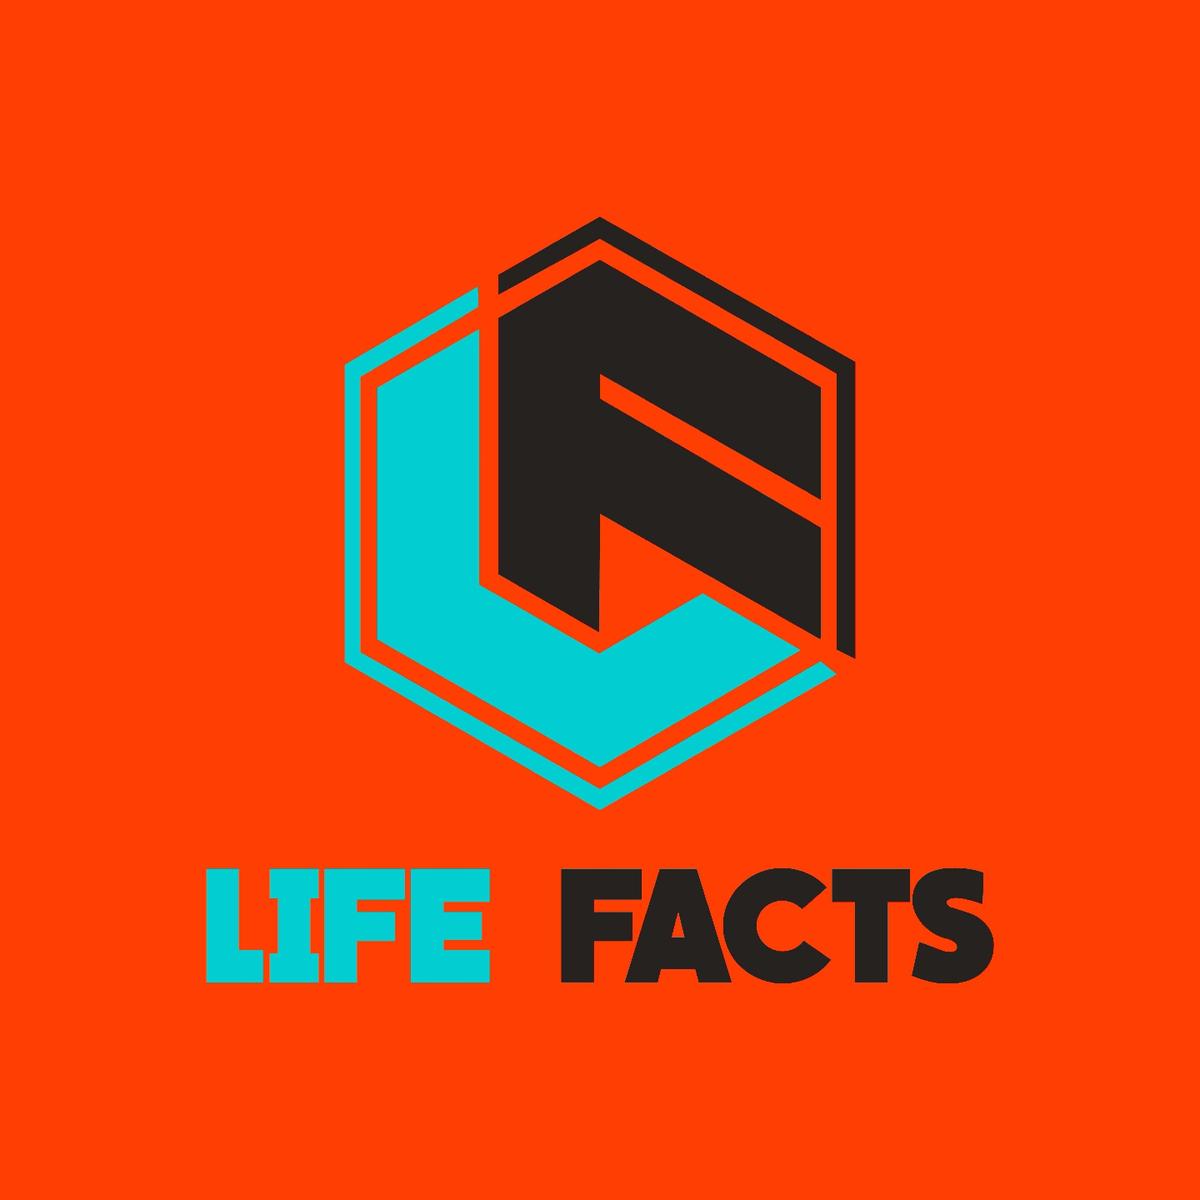 Life Facts's images